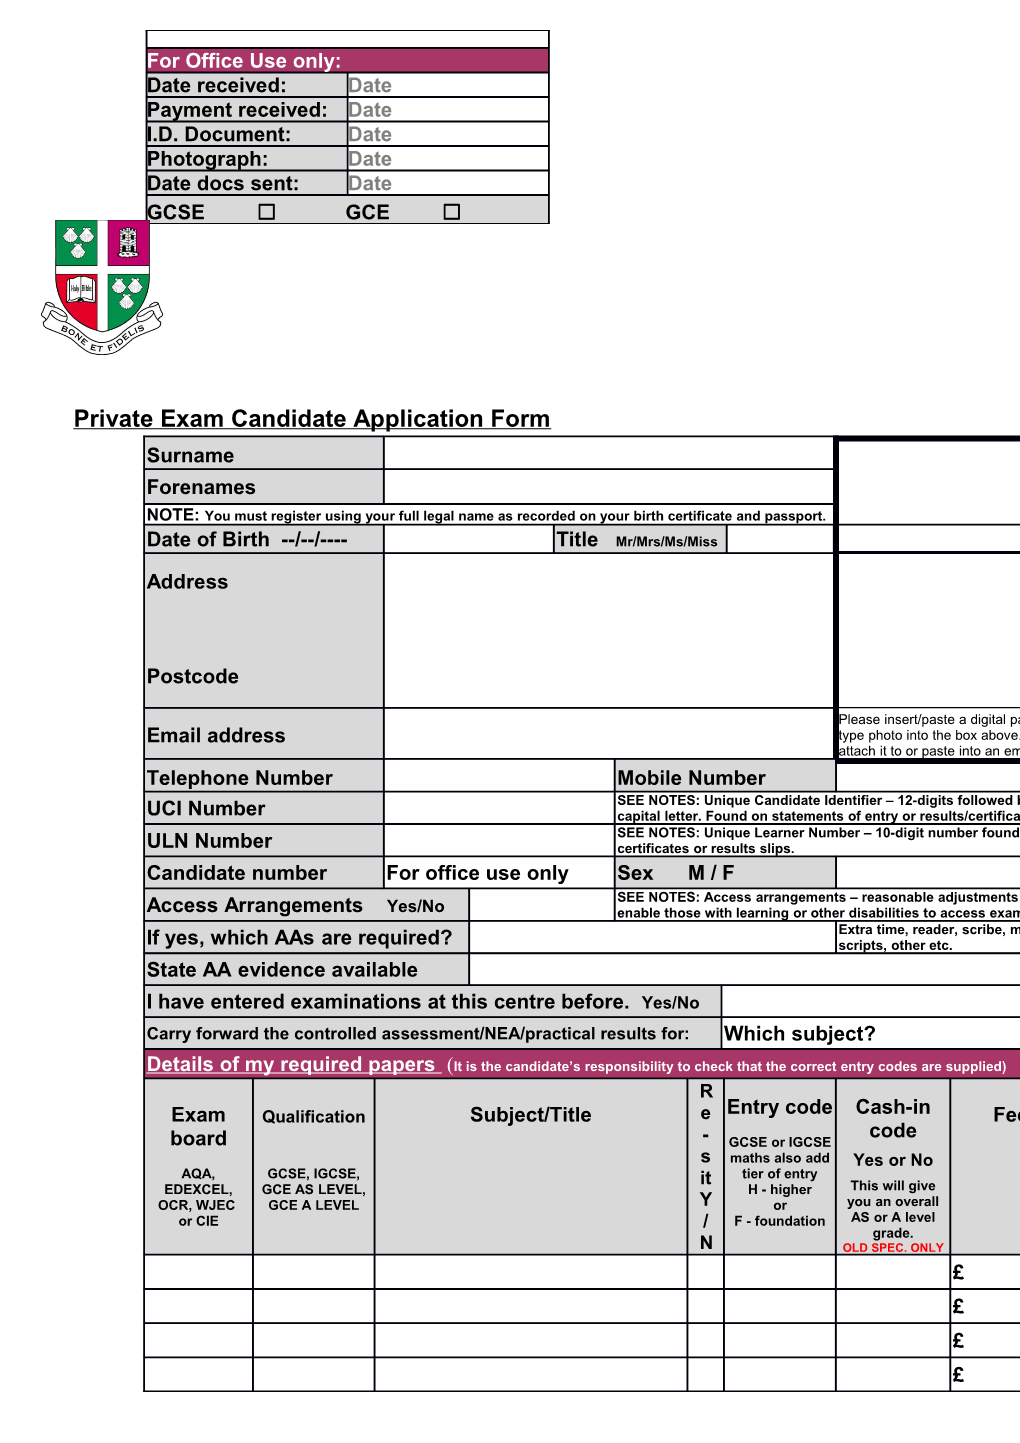 Private Exam Candidate Application Form Exam Series: Nov Jan May/June (Delete)